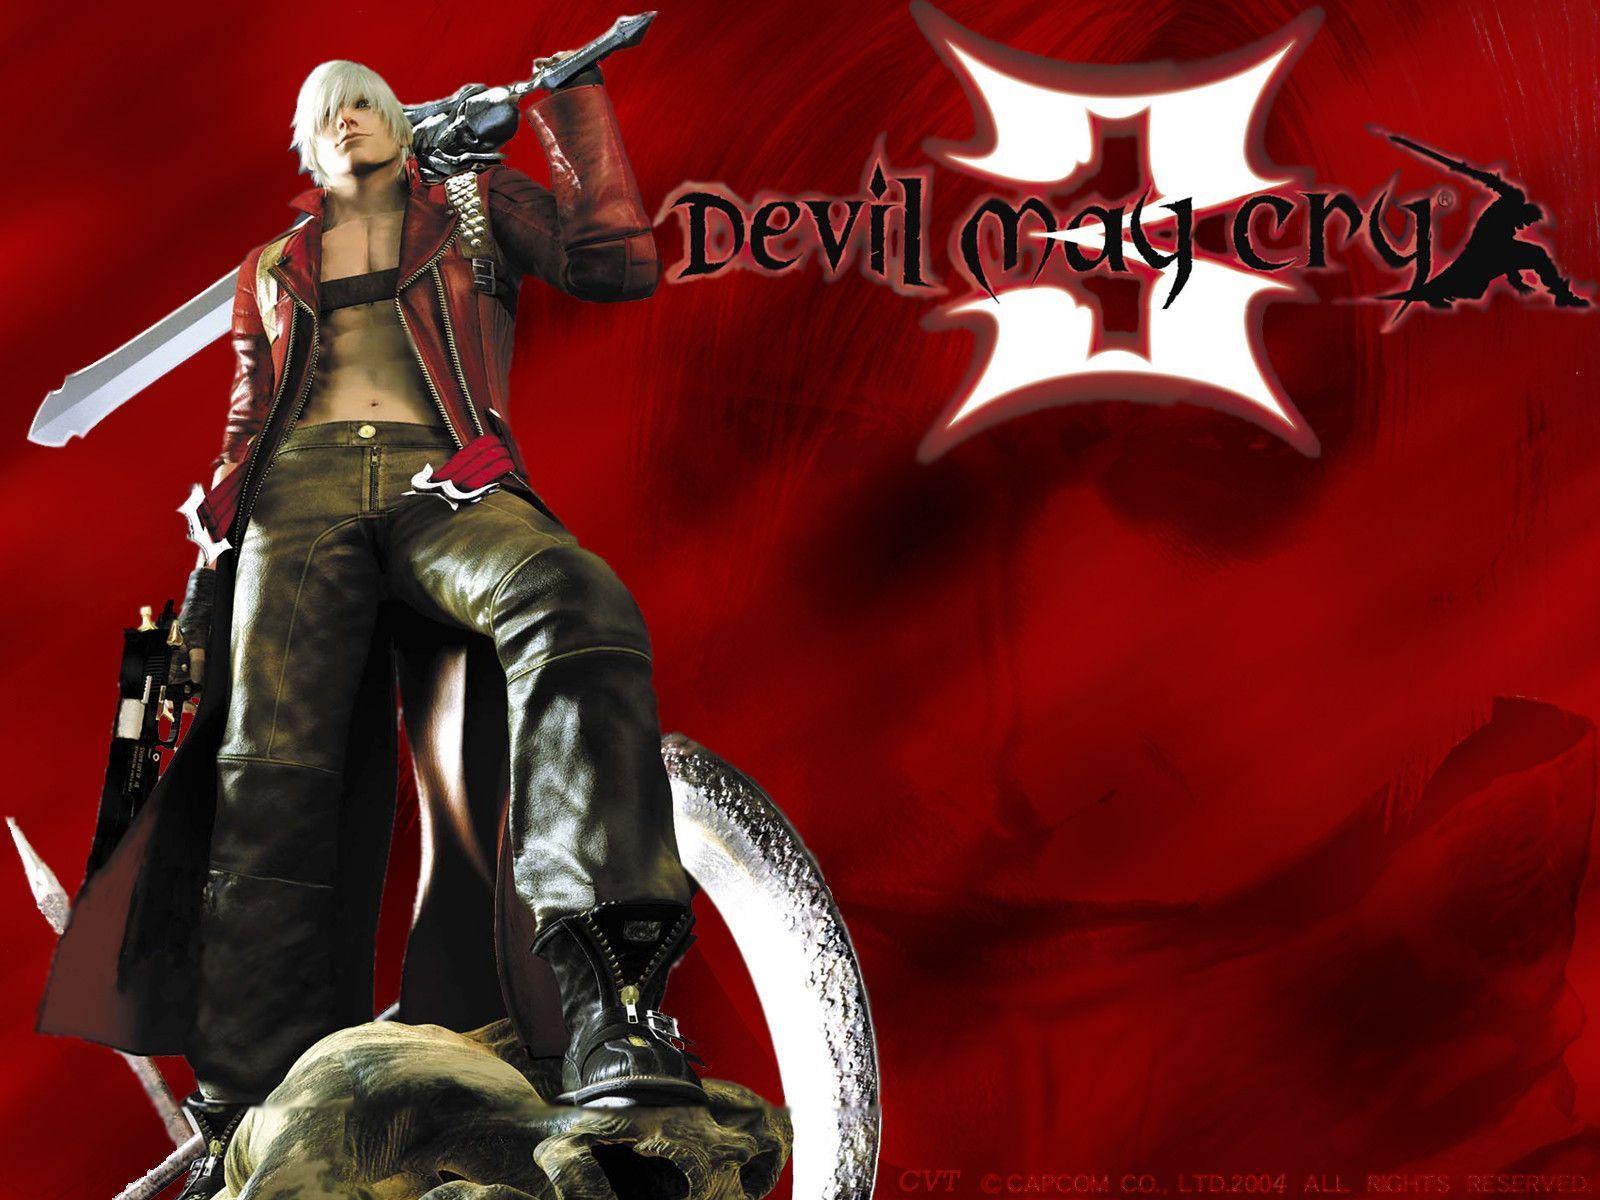 devil-may-cry-3-wallpapers-wallpaper-cave